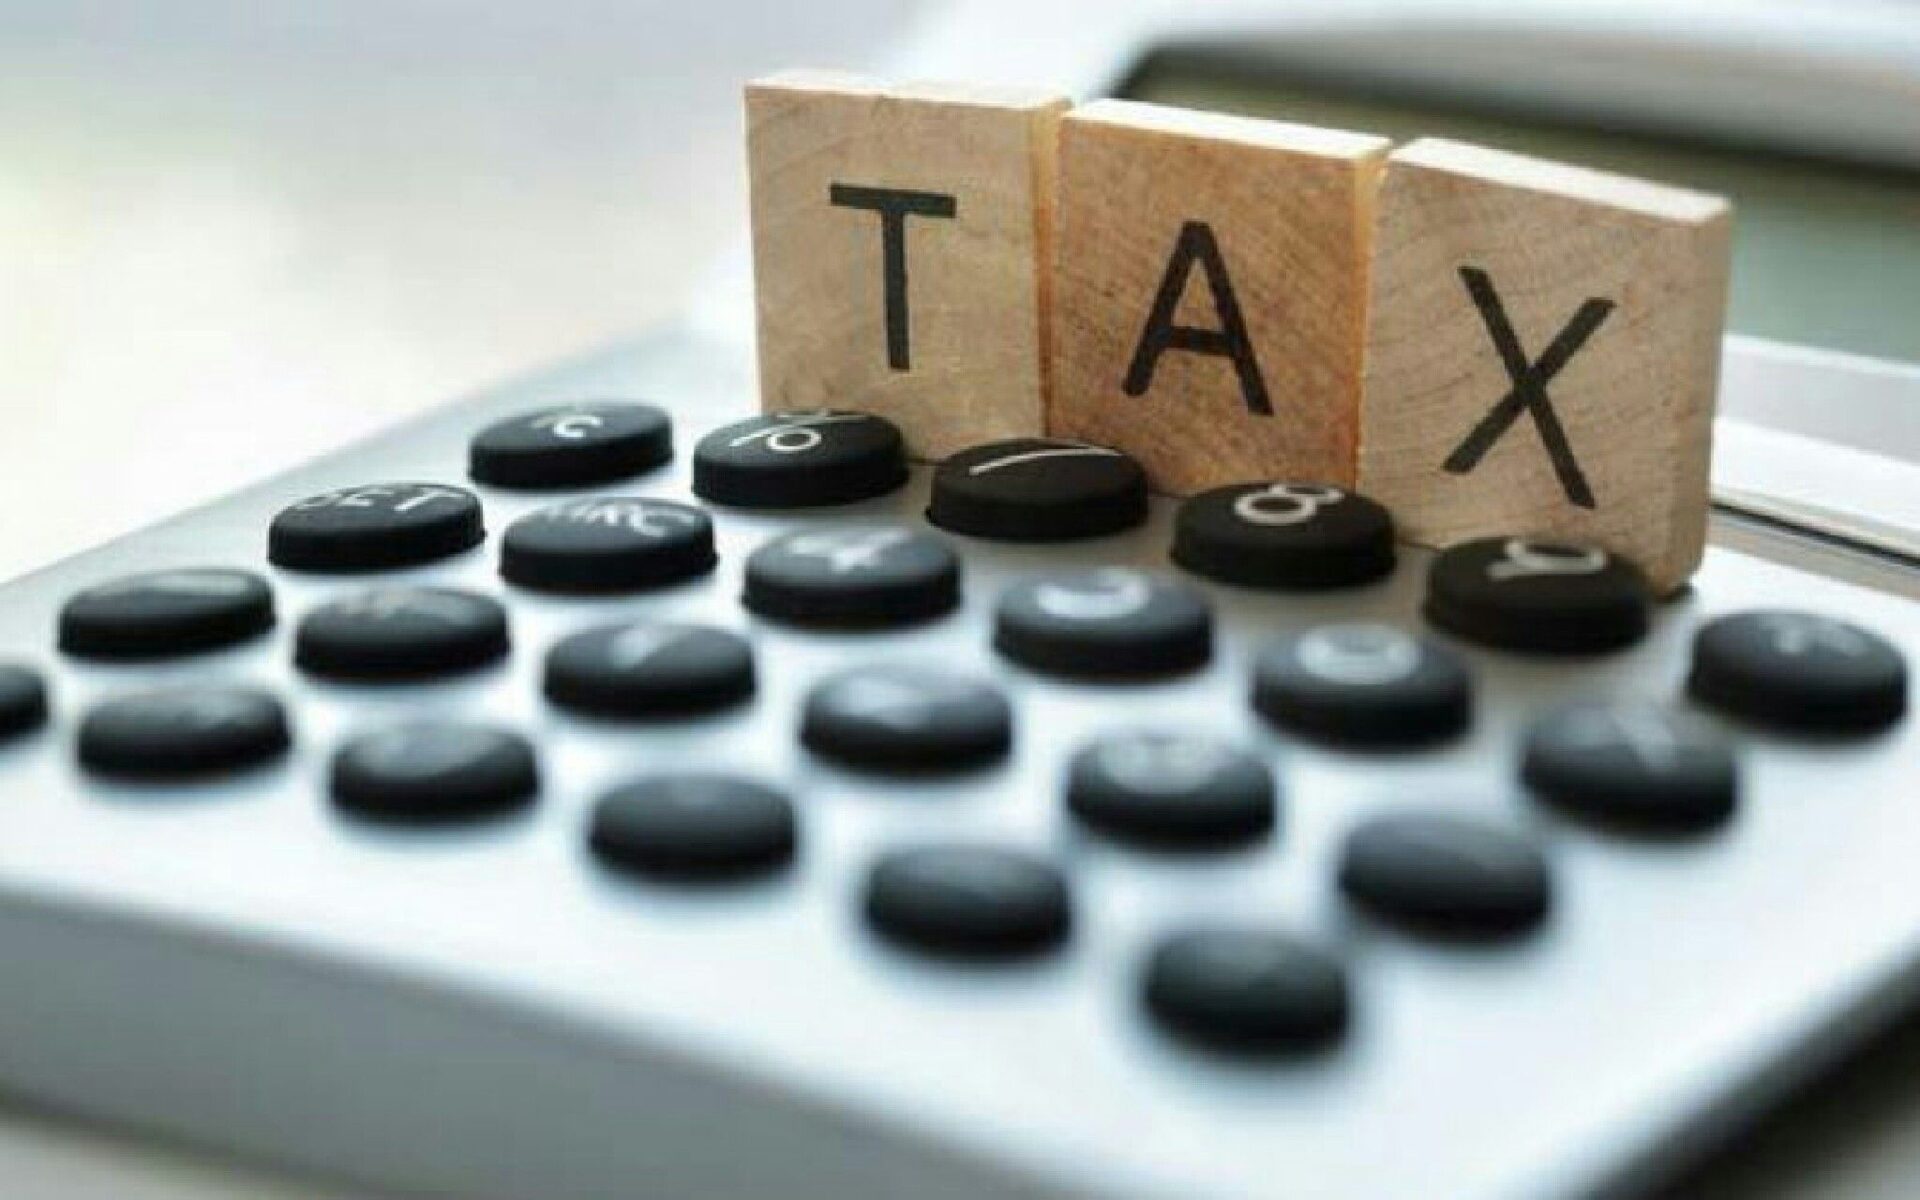 Article-Is excise duty a tax borne or a tax collected